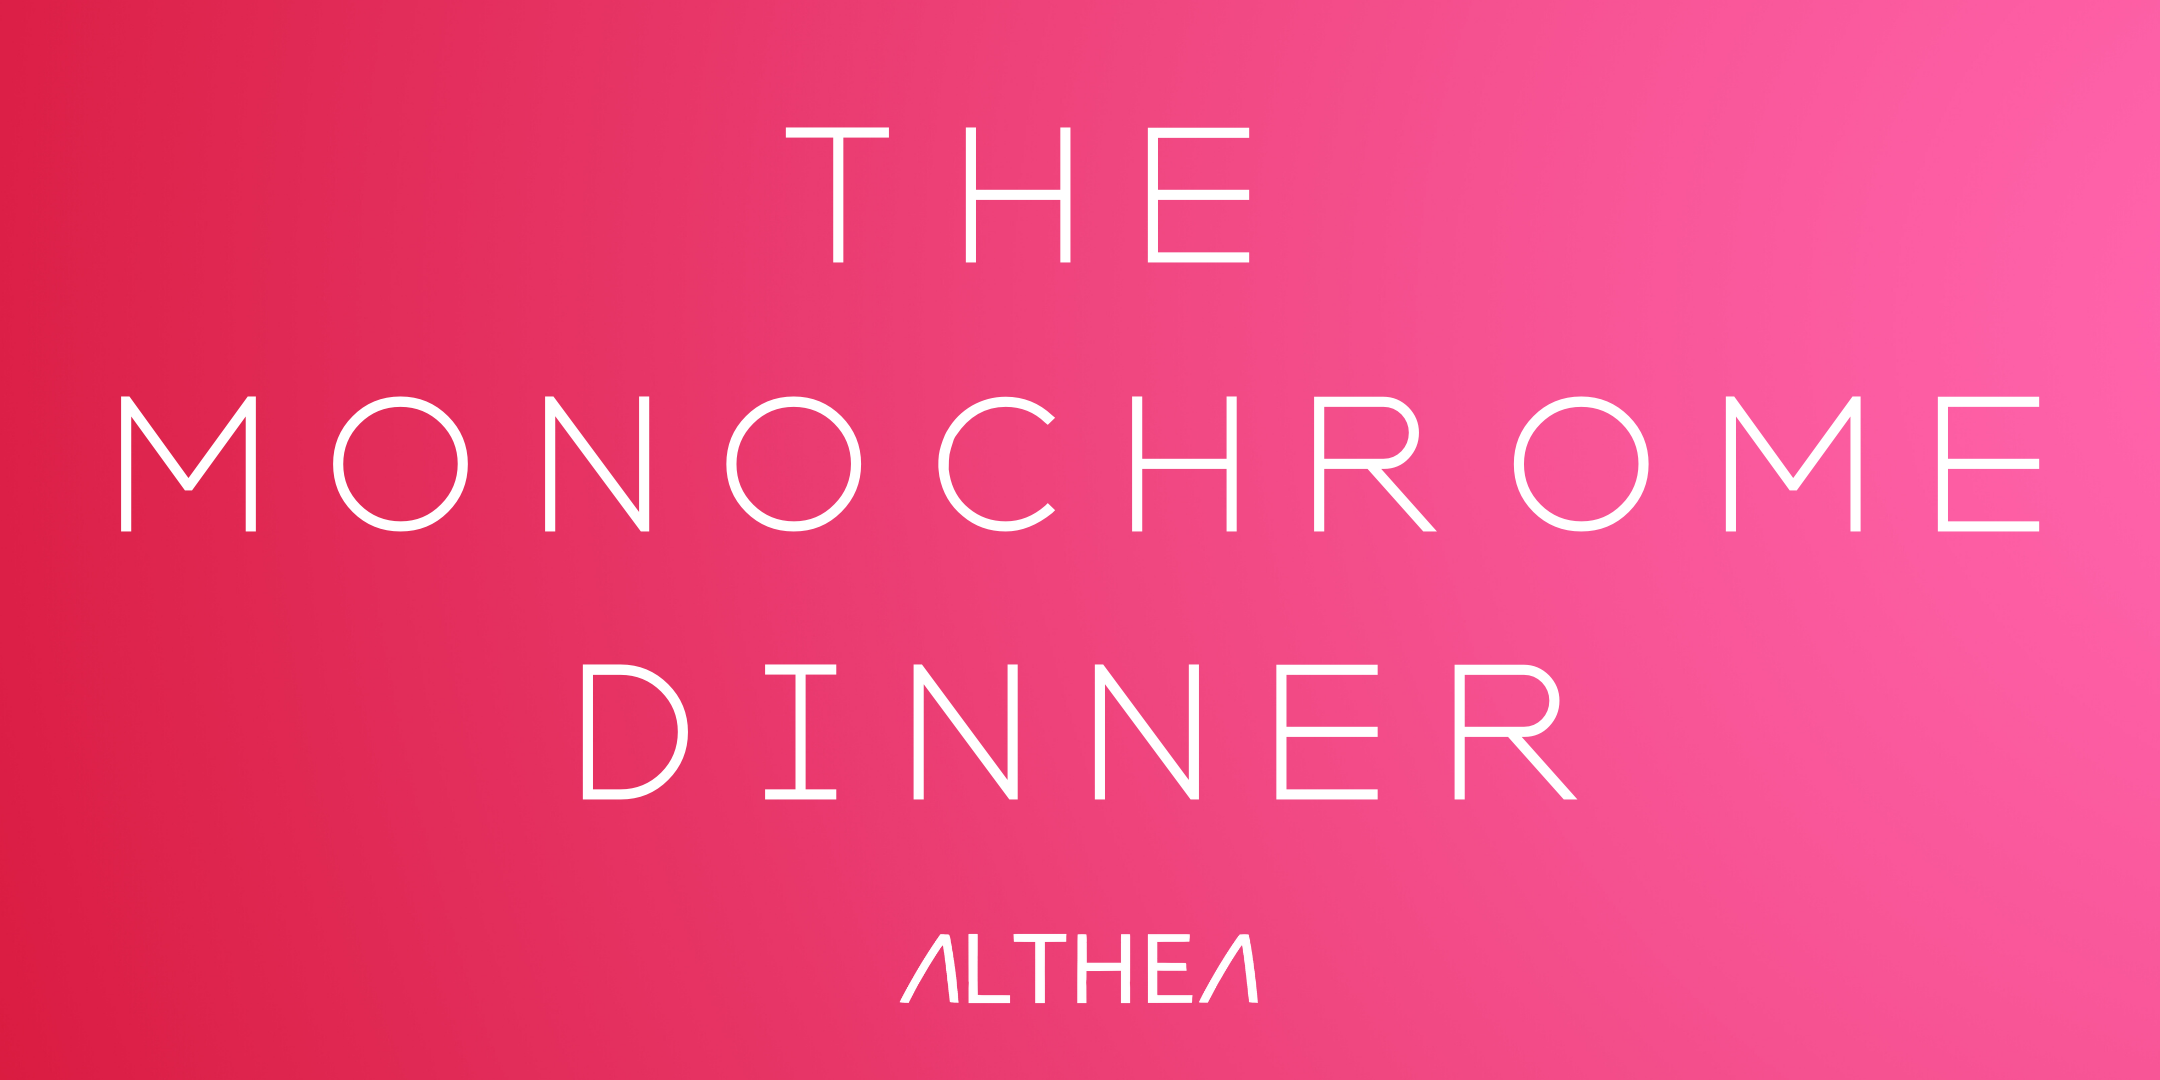 THE MONOCHROME DINNER AT ALTHEA